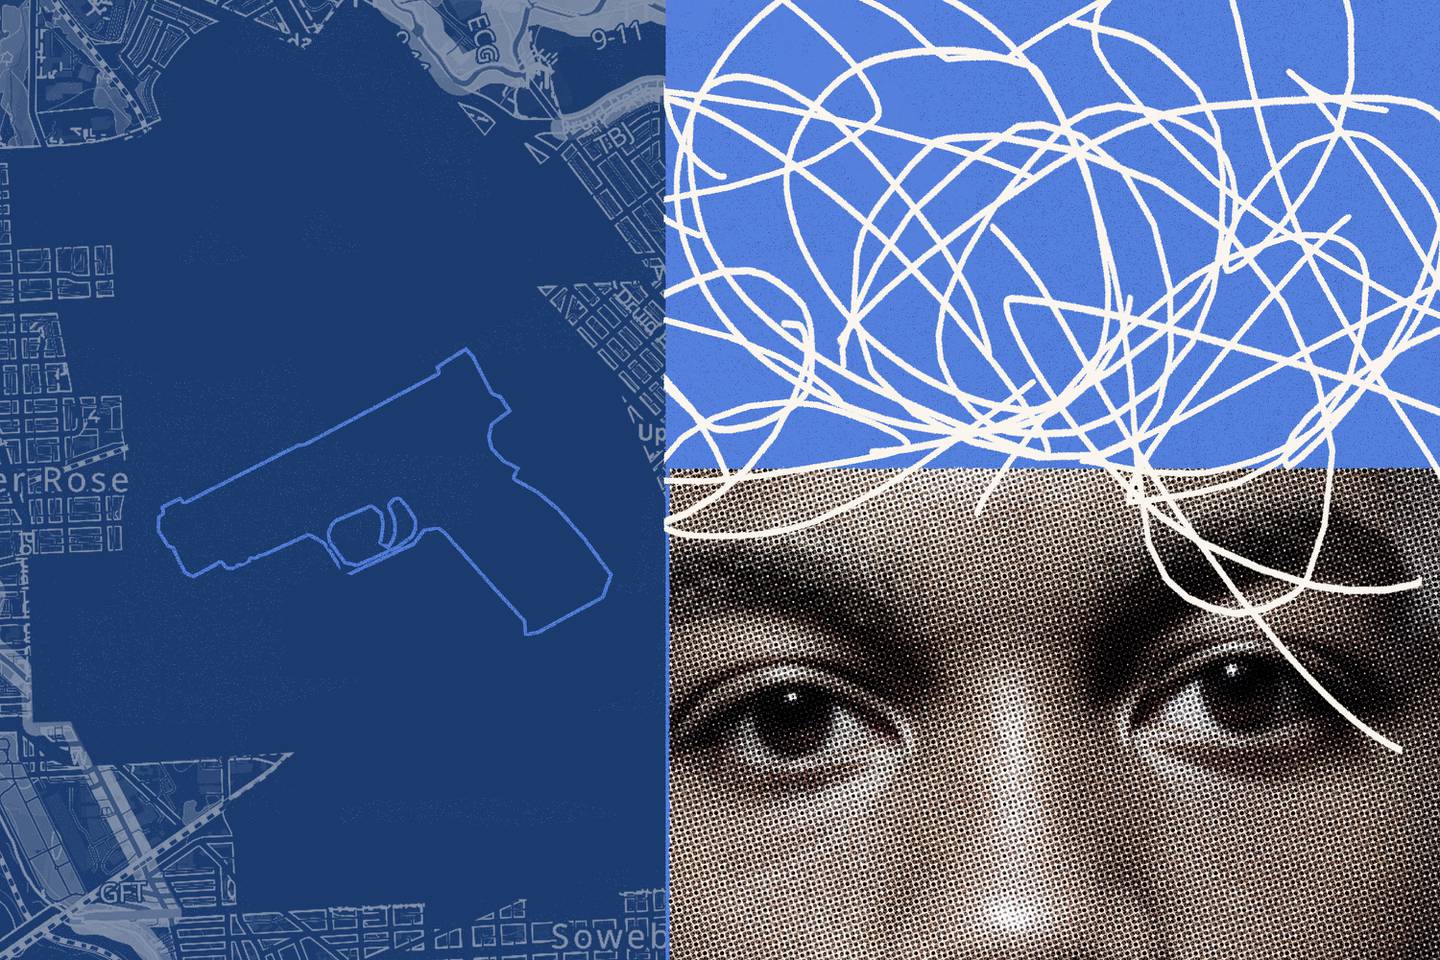 Photo collage showing silhouette of gun within the Western District map on the left side. On the right side, a mess of scribbles sits above a close-up of a young man’s eyes.